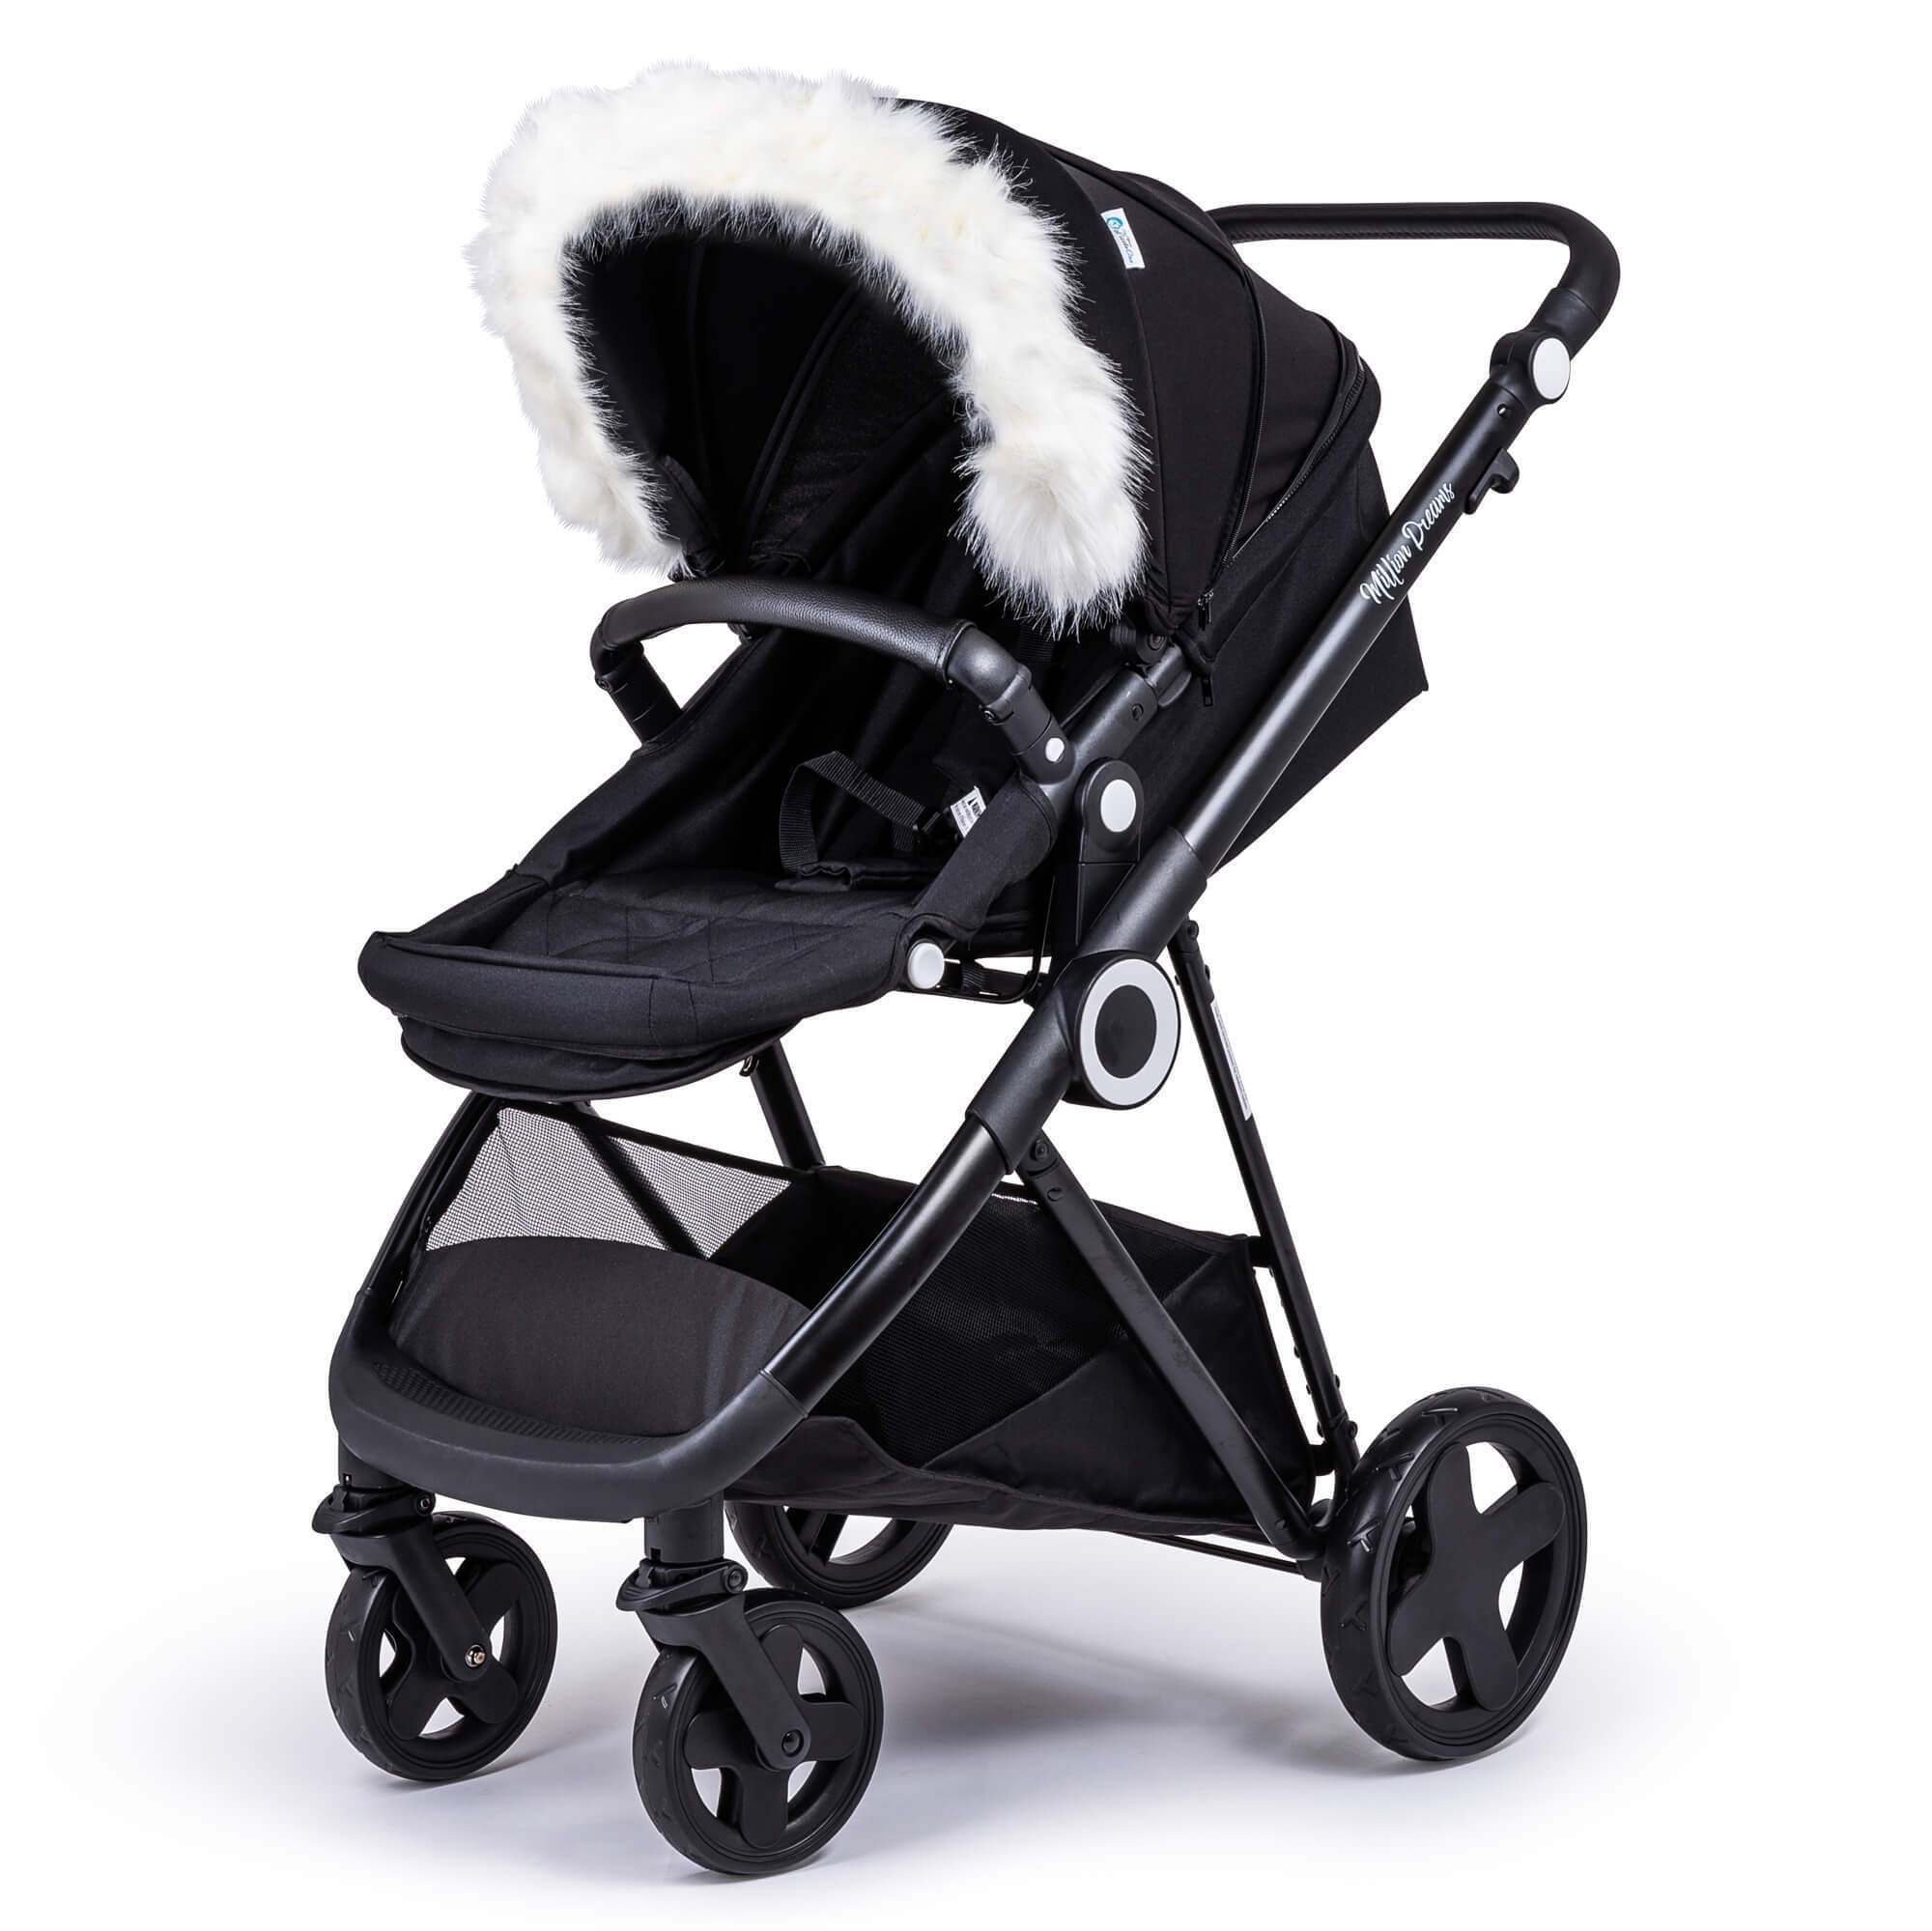 Pram Fur Hood Trim Attachment for Pushchair Compatible with BOB - White / Fits All Models | For Your Little One